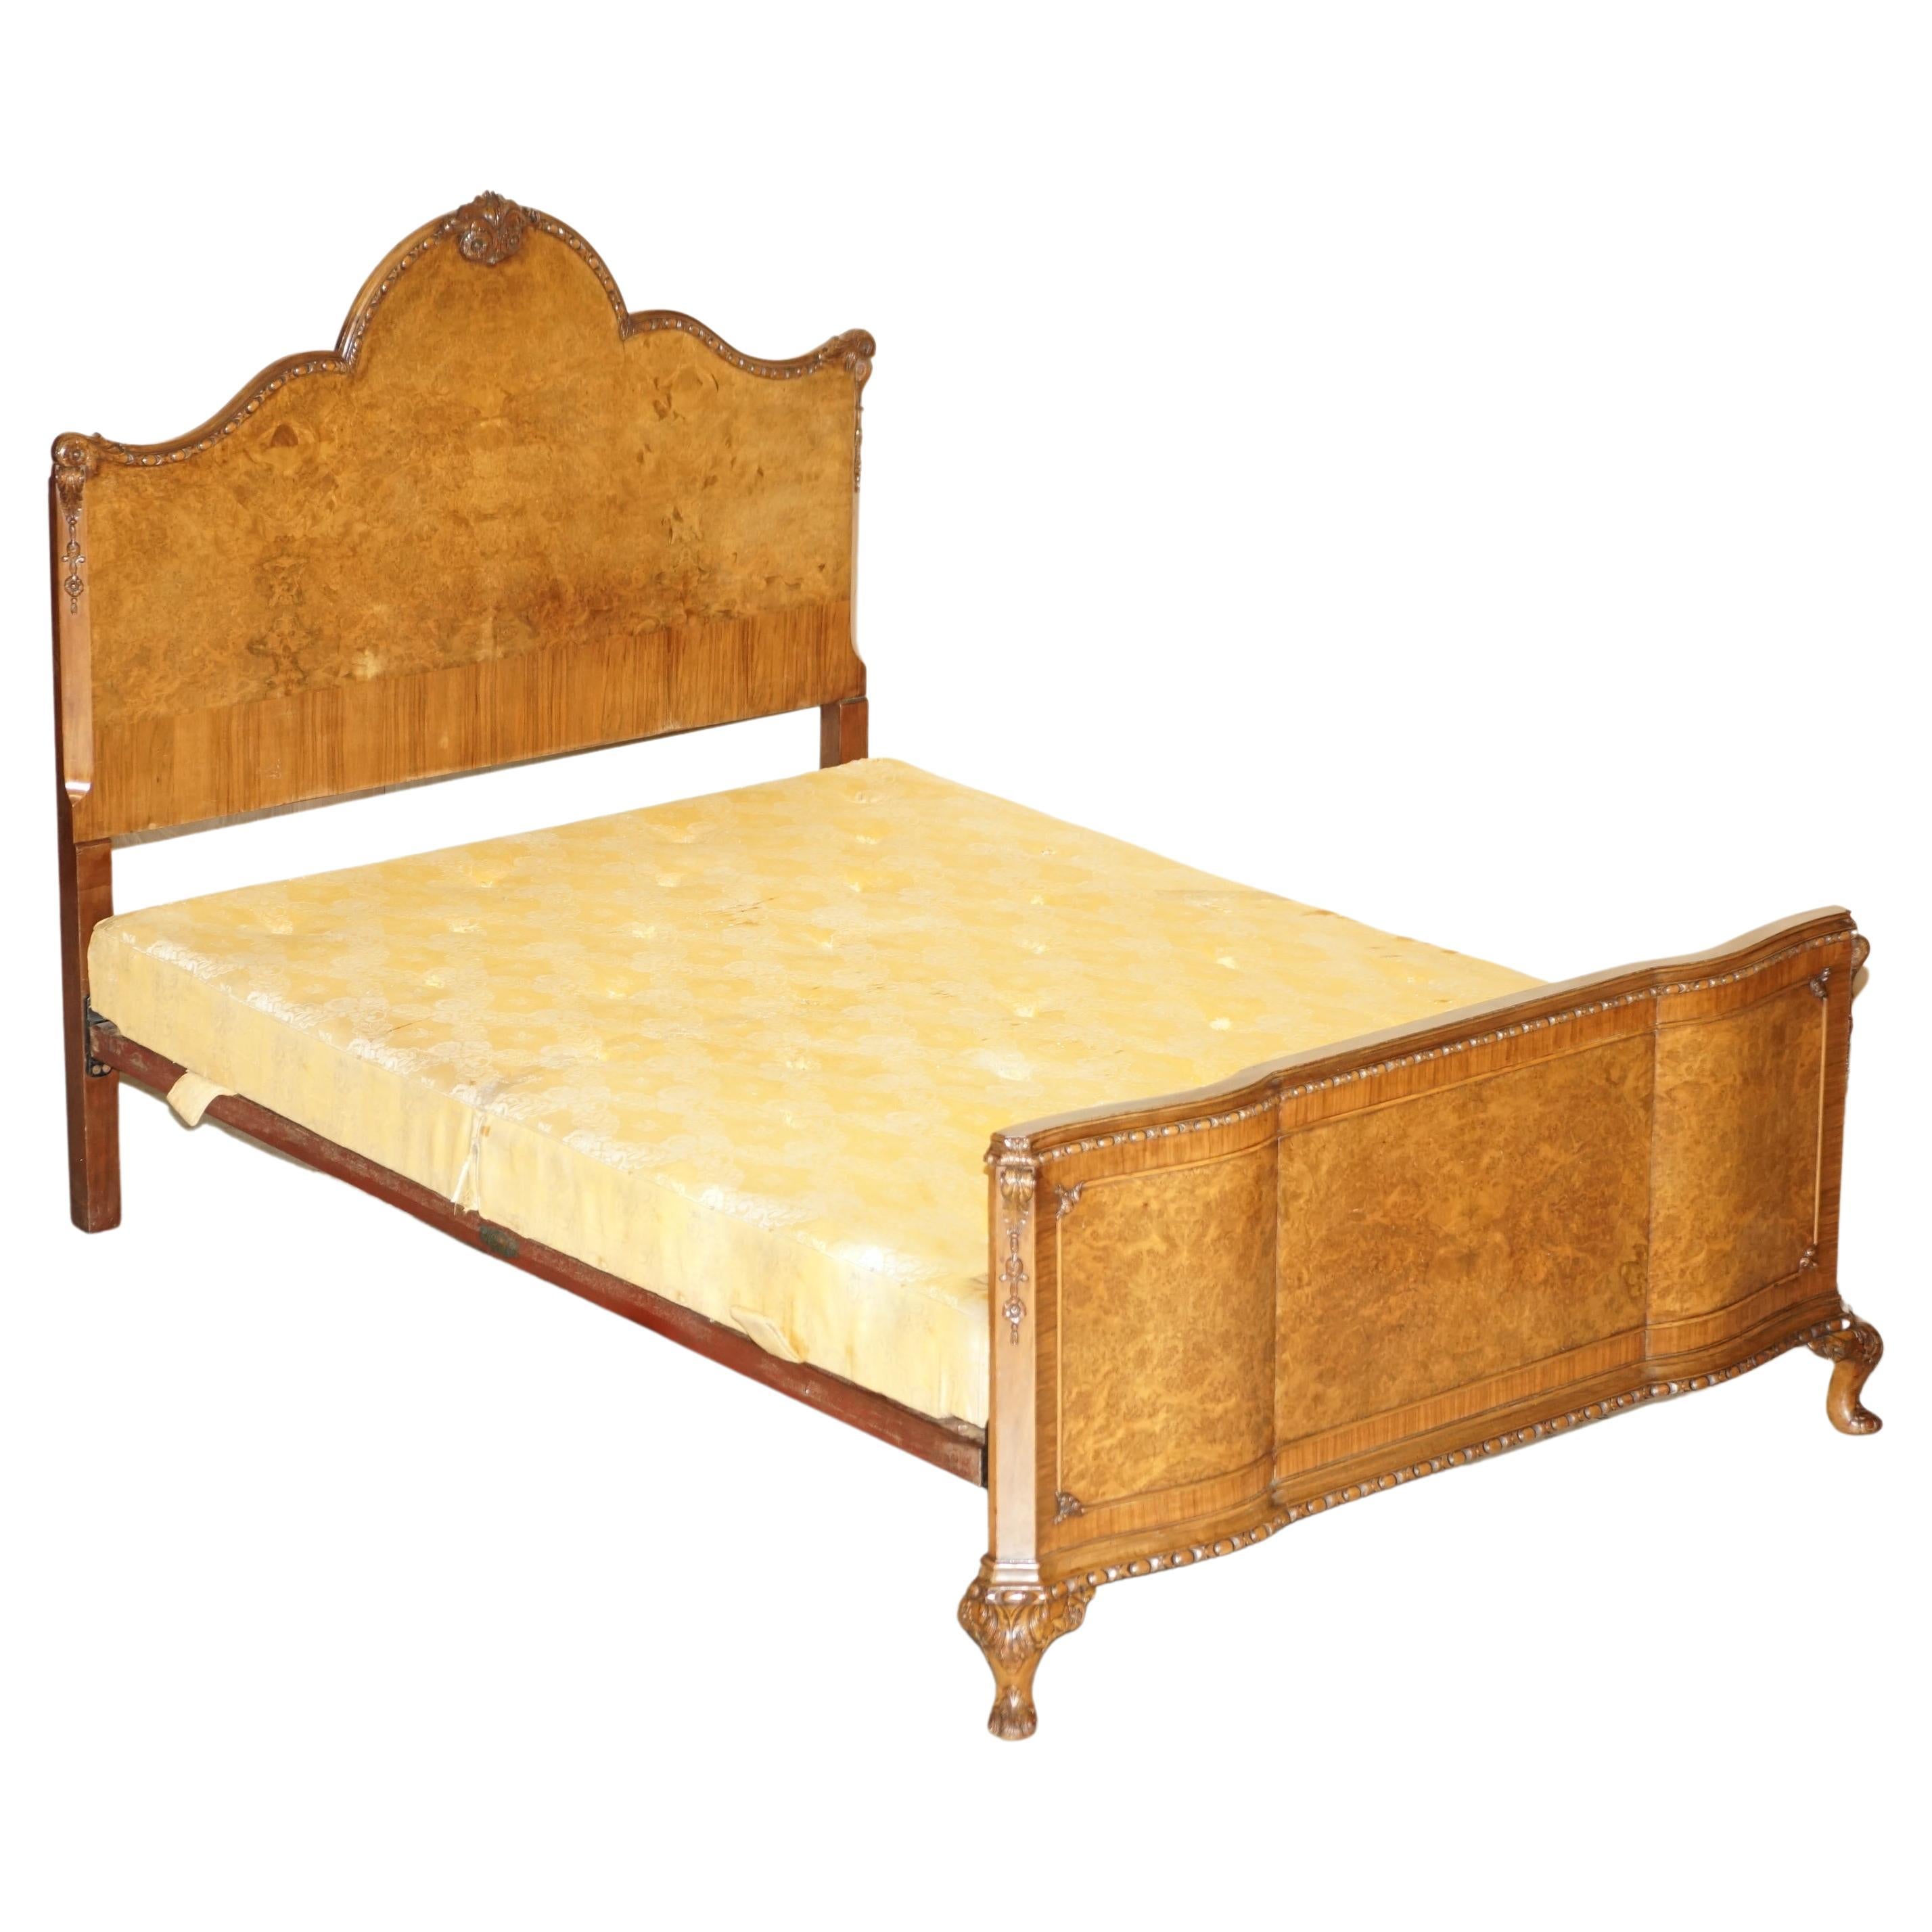 STUNNING WARING & GILLOWS HARRODS LONDON CiRCA 1950'S BURR WALNUT BED STEAD For Sale